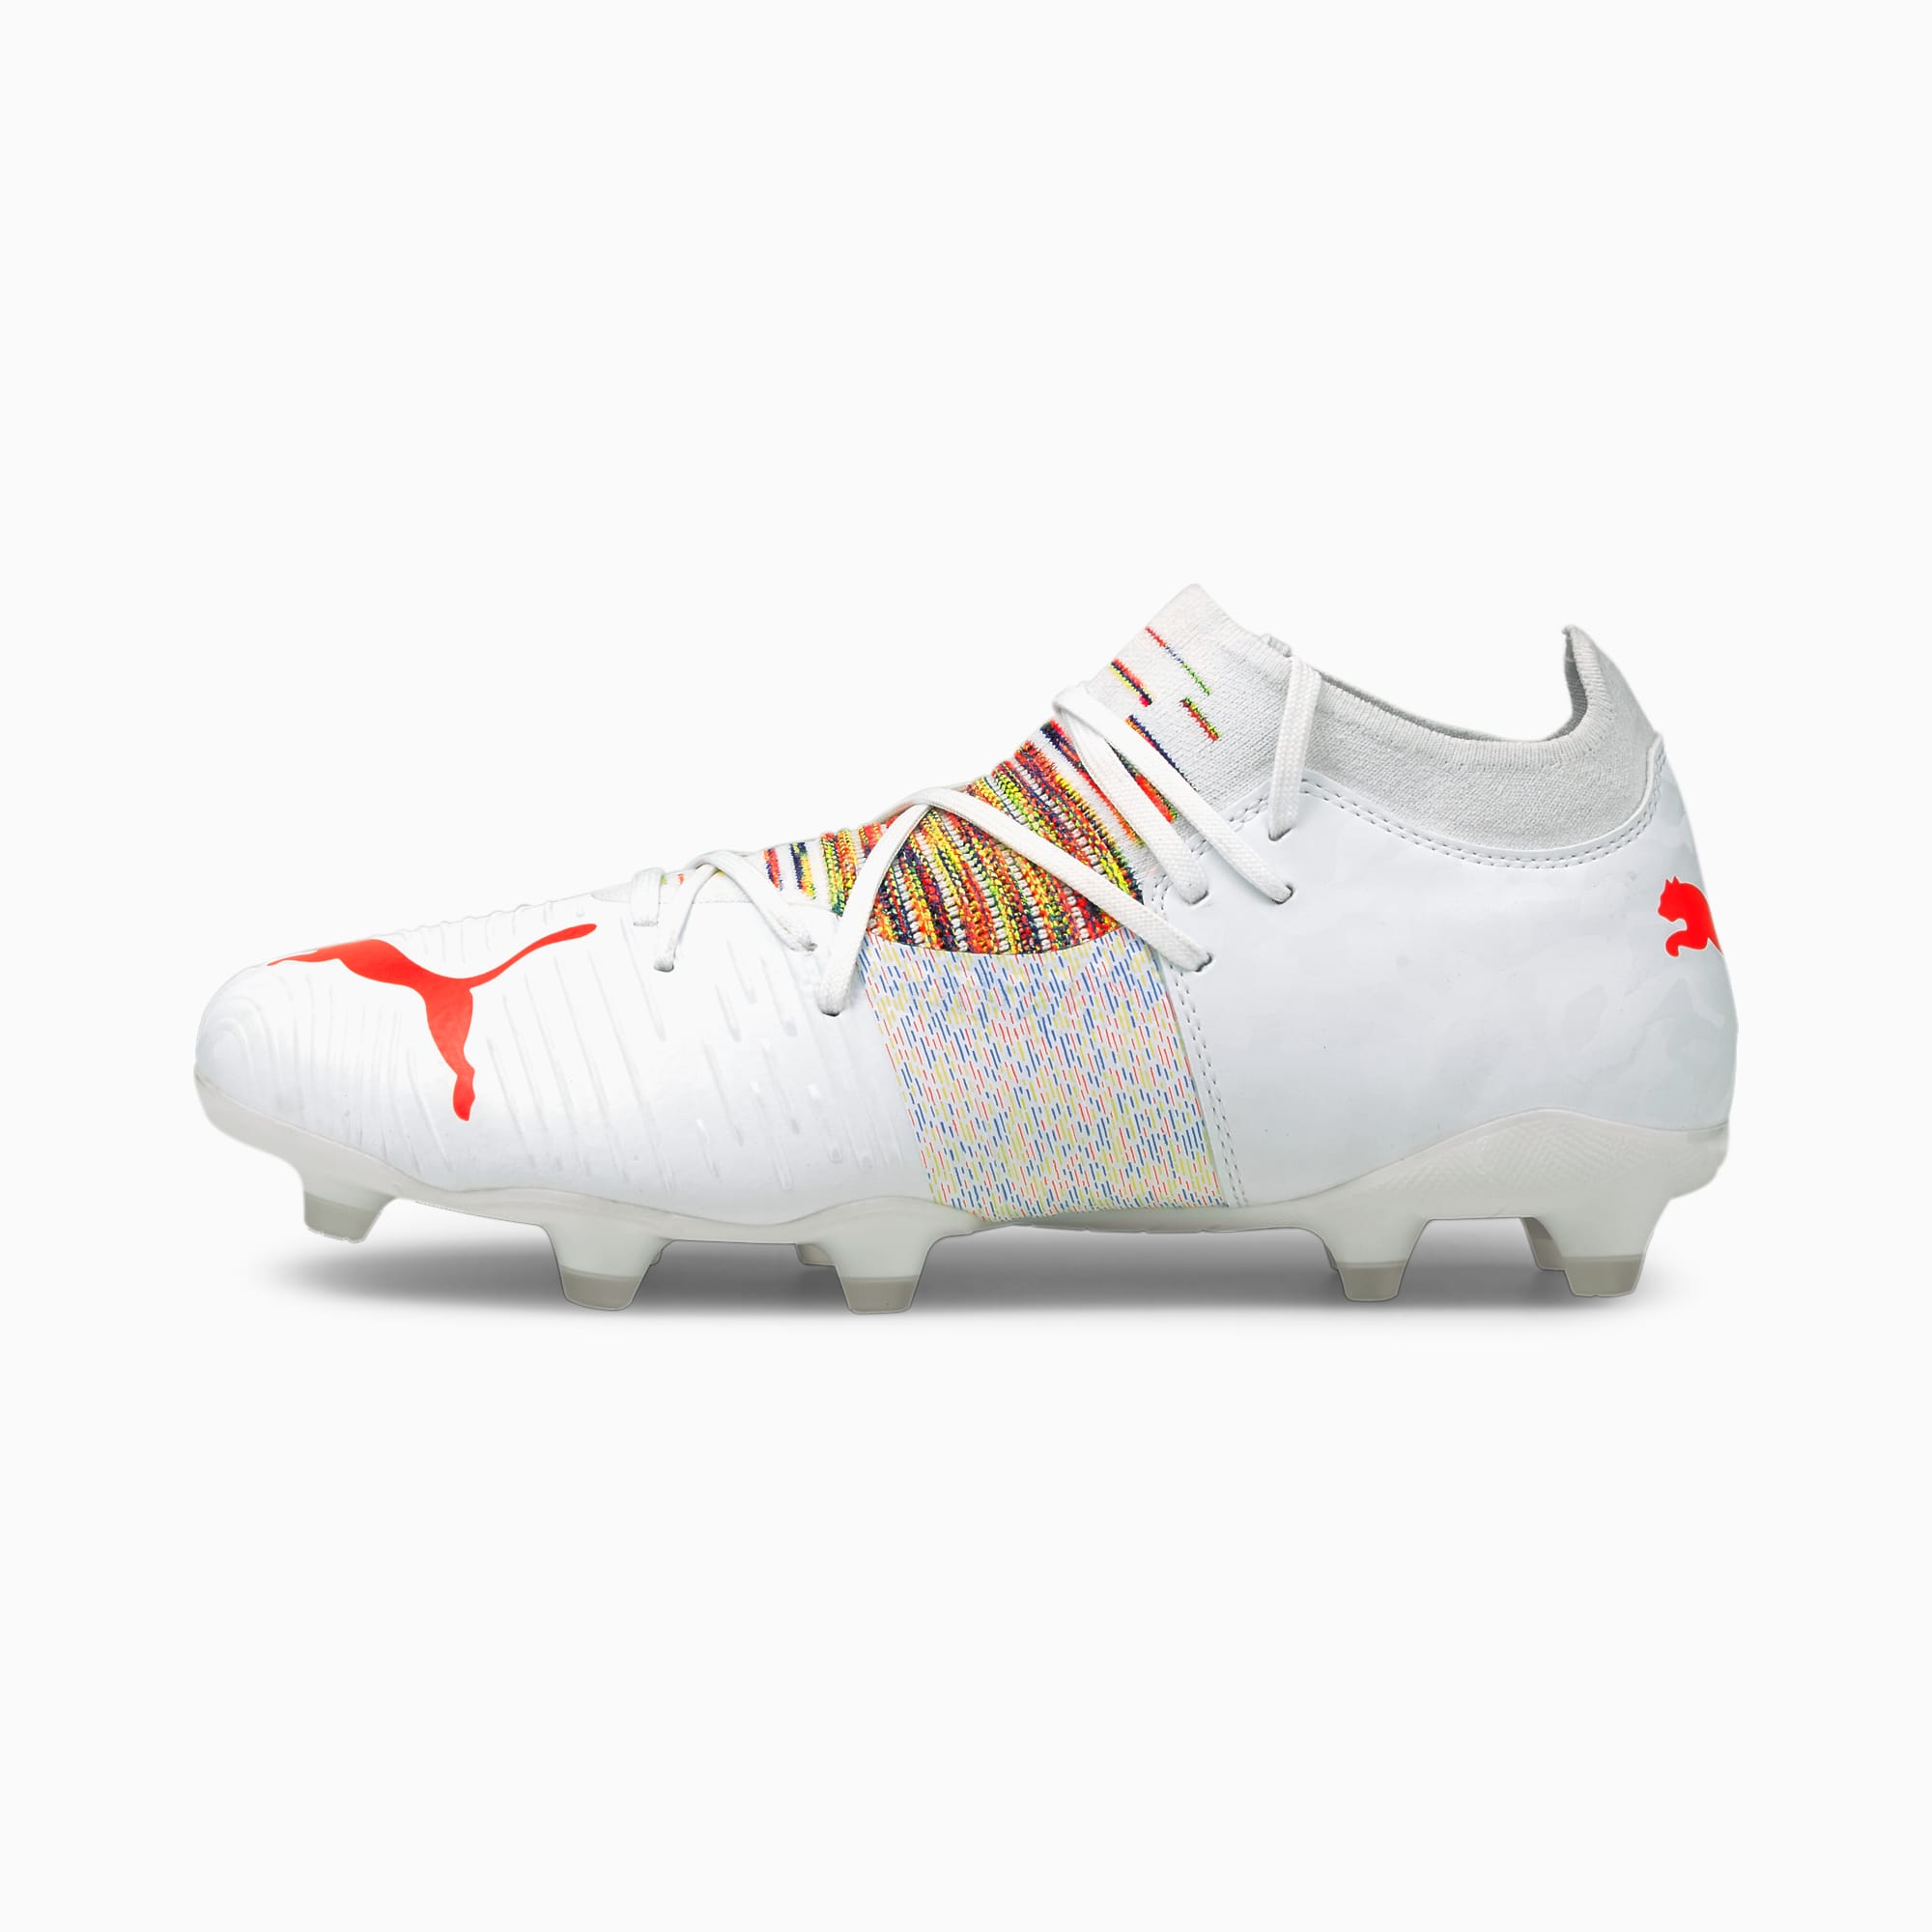 PUMA Chaussures de football FUTURE Z 3.1 FG/AG homme, Blanc/Rouge, Taille 40.5, Chaussures